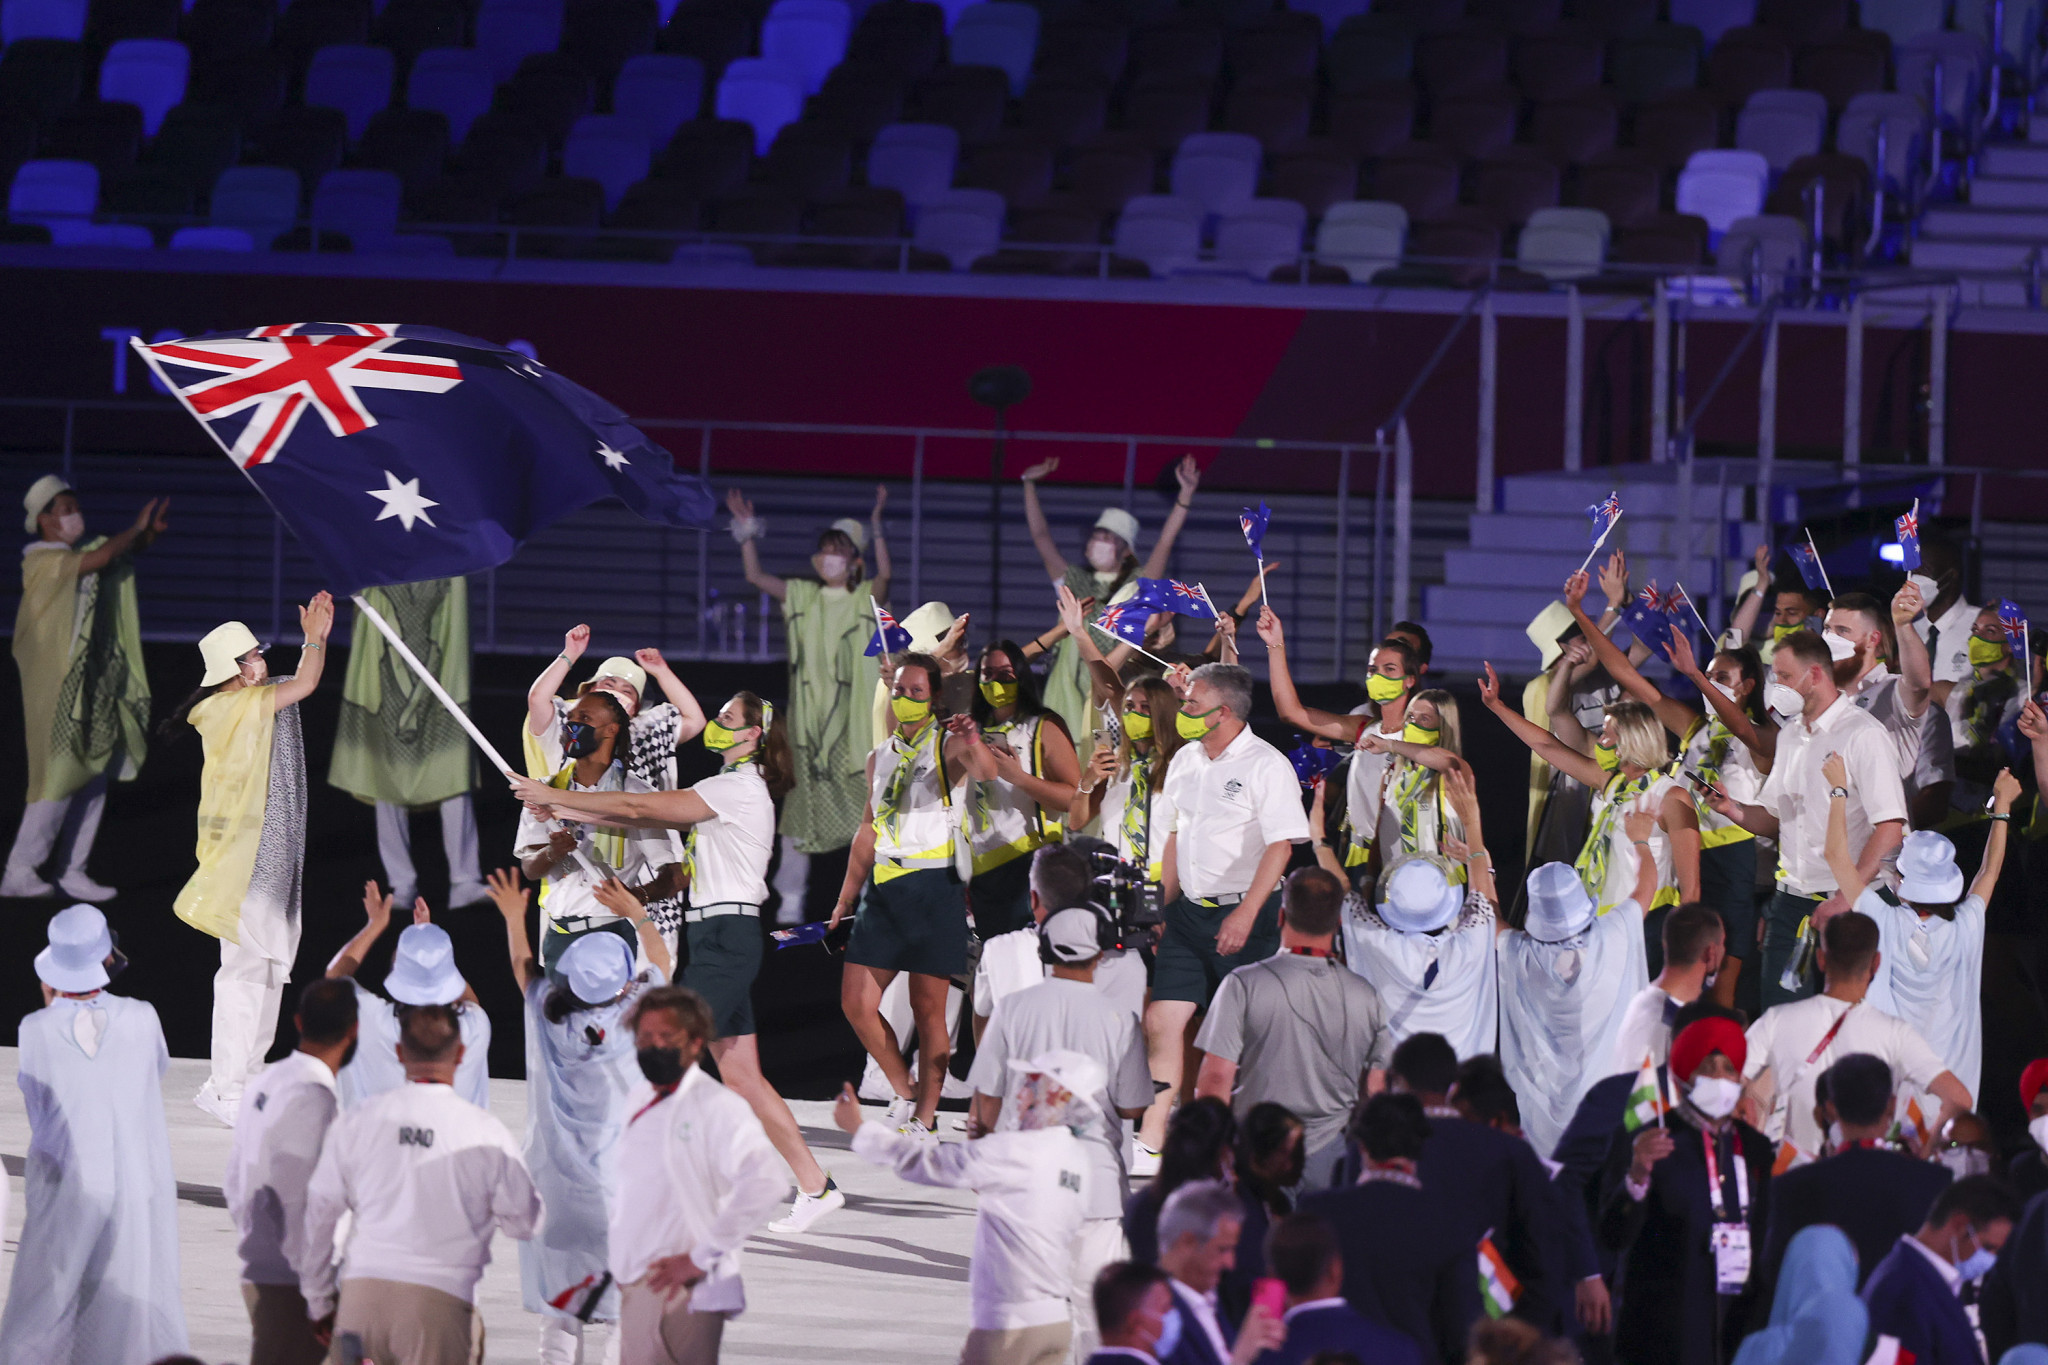 Australia earned a joint-record 17 golds at the Tokyo 2020 Olympics, but has not set a medal target for Paris 2024 ©Getty Images